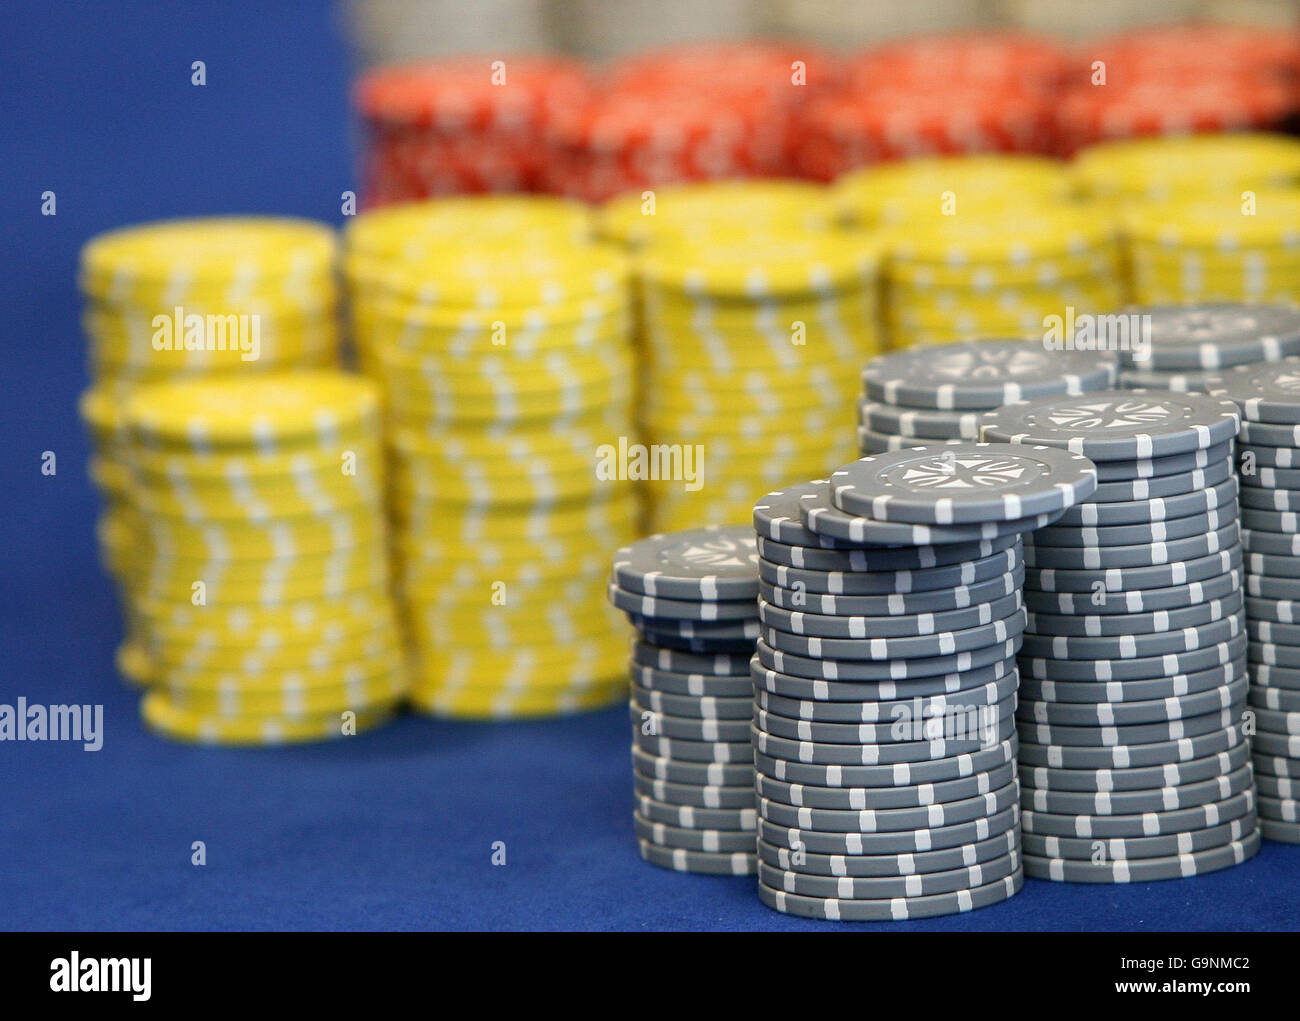 Gambling chips at the regional gaming academy at Blackpool and Fylde college, based in the Lancashire seaside town of Blackpool - one of the frontrunners among the seven areas shortlisted to host Britain's first supercasino. Stock Photo